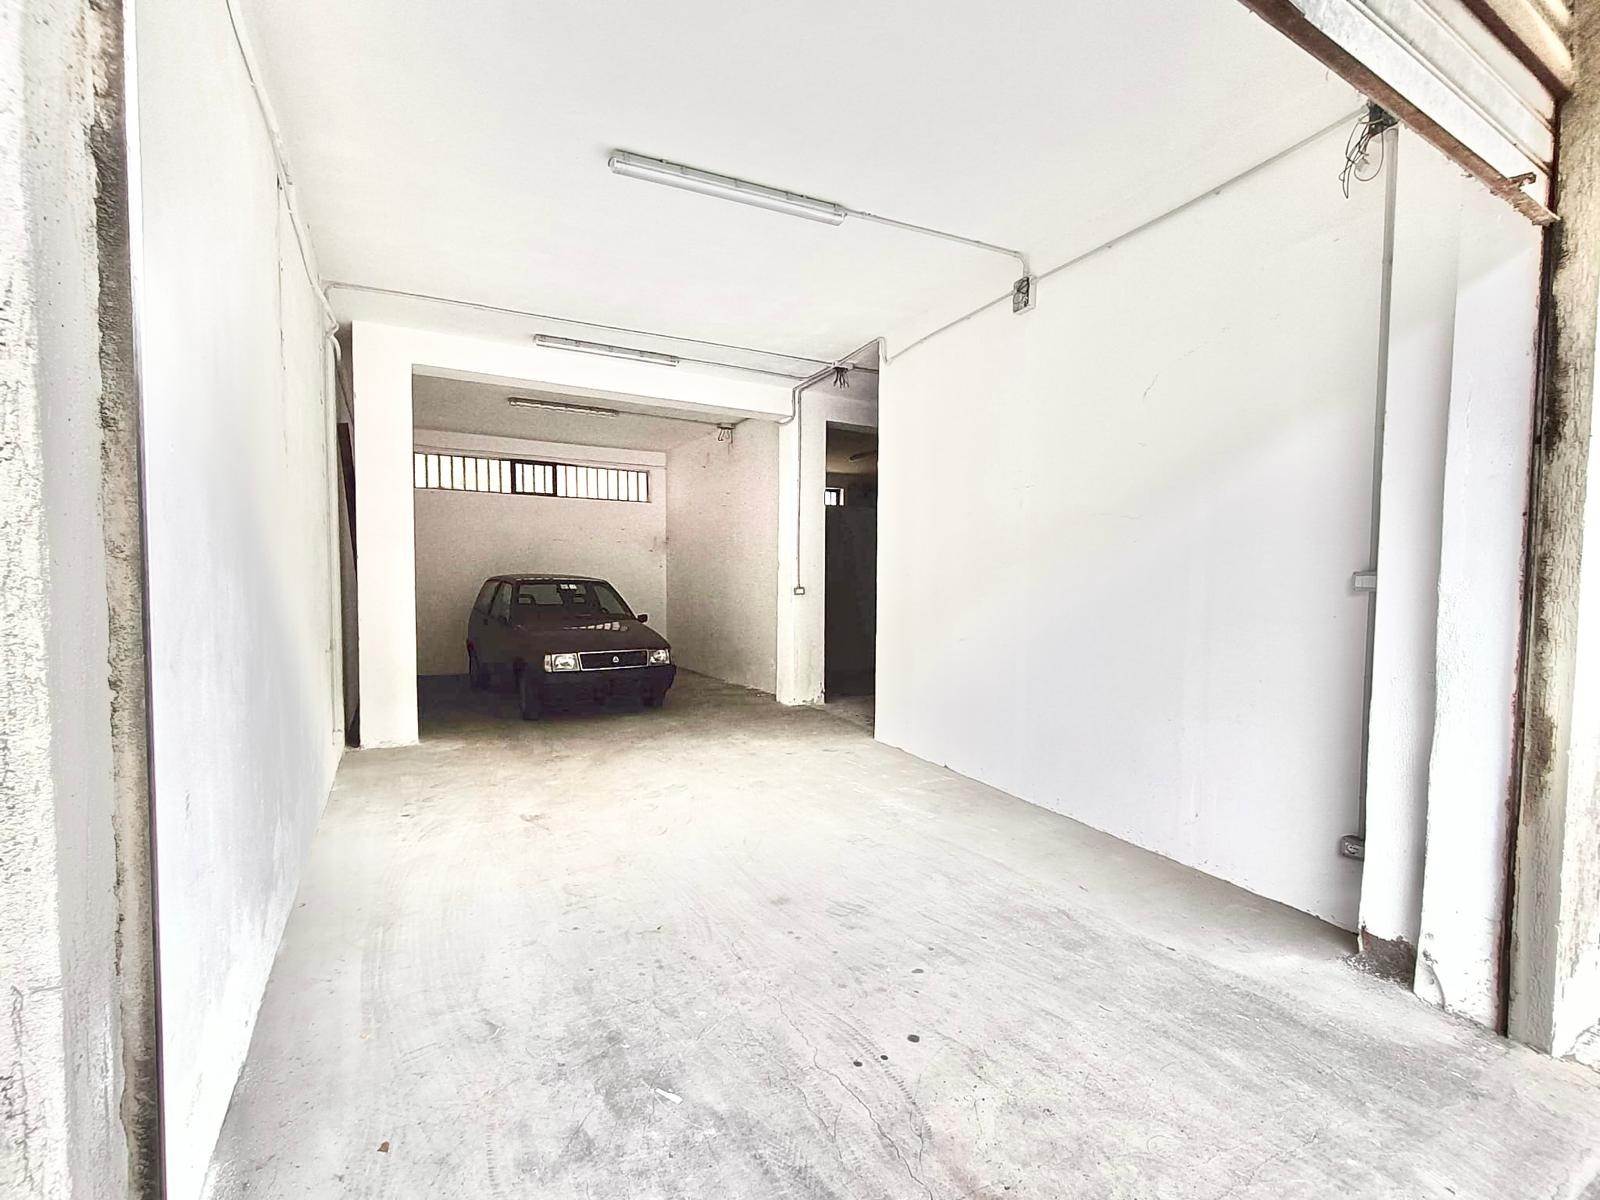 ACI CATENA, Warehouse for rent of 130 Sq. mt., Good condition, Energetic class: G, placed at Basement on 3, composed by: 2 Rooms, 1 Bathroom, Price: 